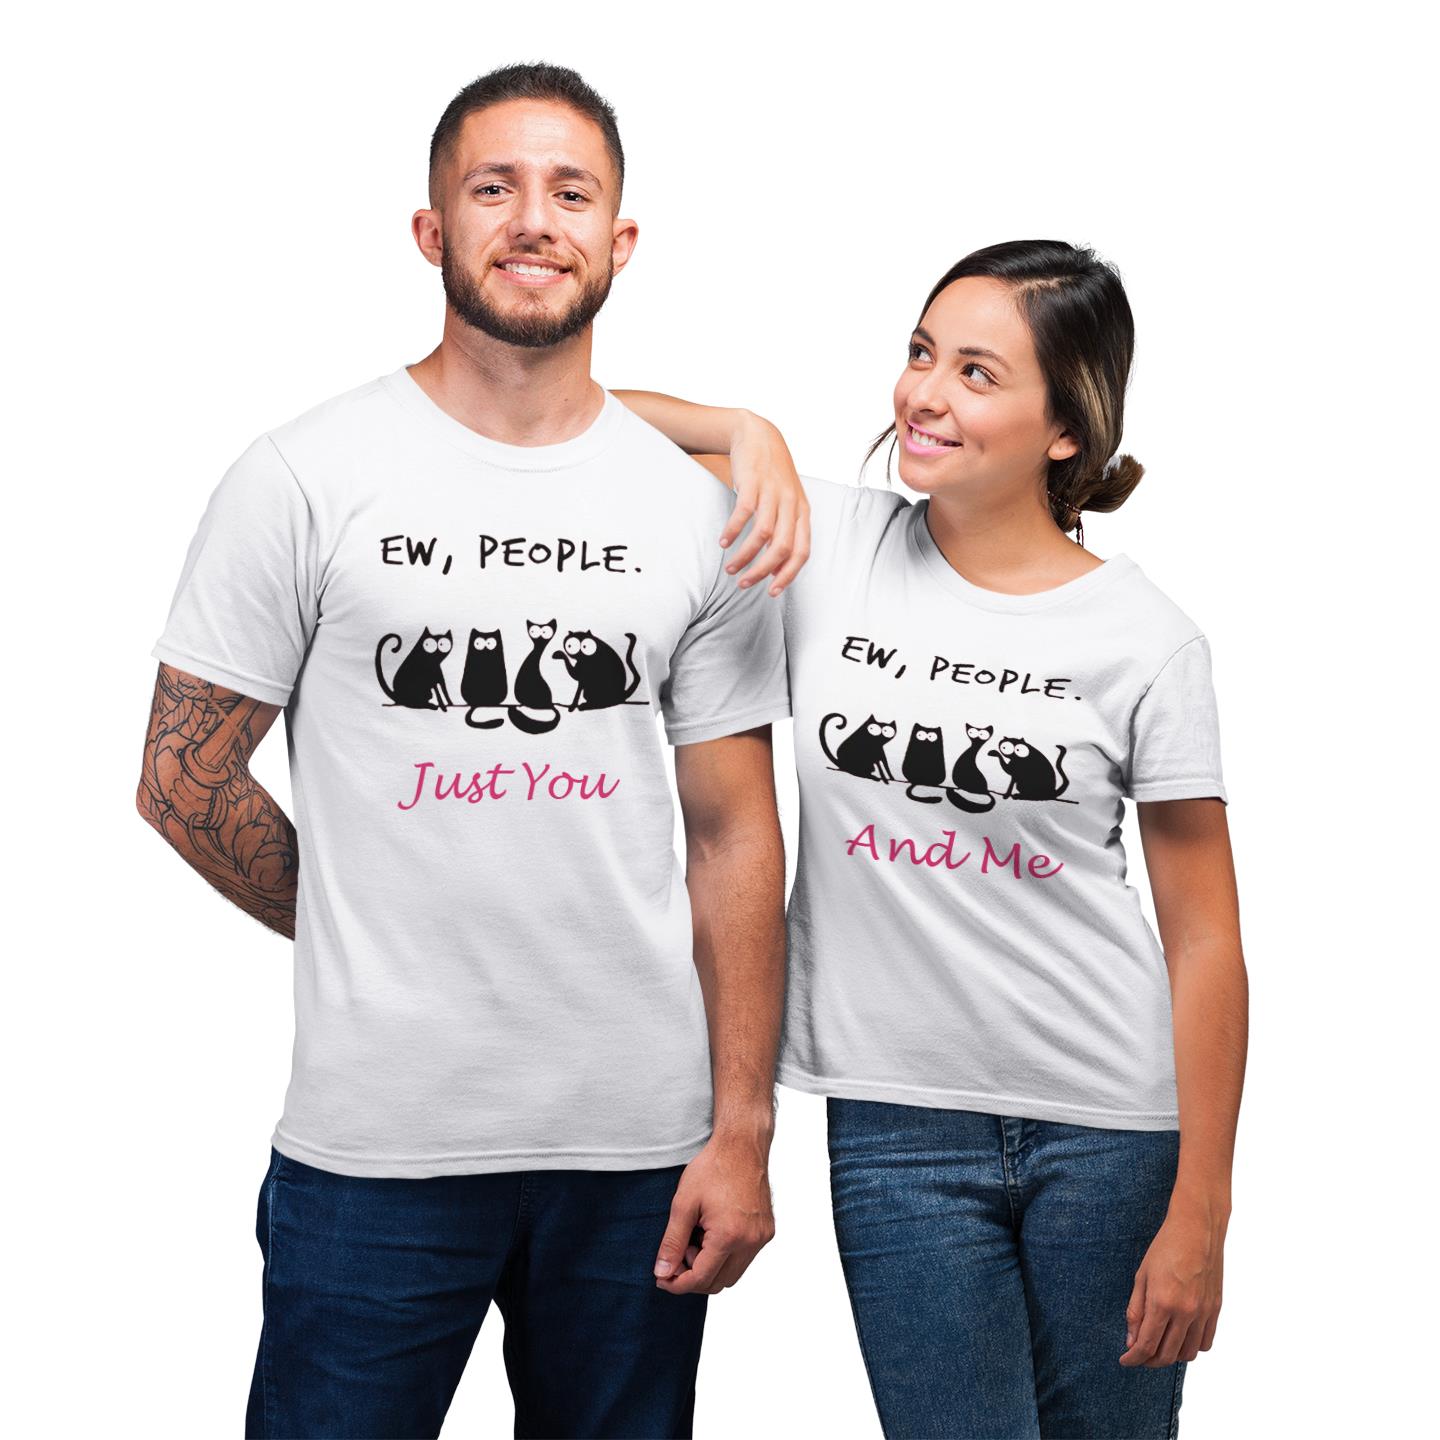 Eww People Just You And Me Are Enough Shirt For Couples Lover Matching T-shirt